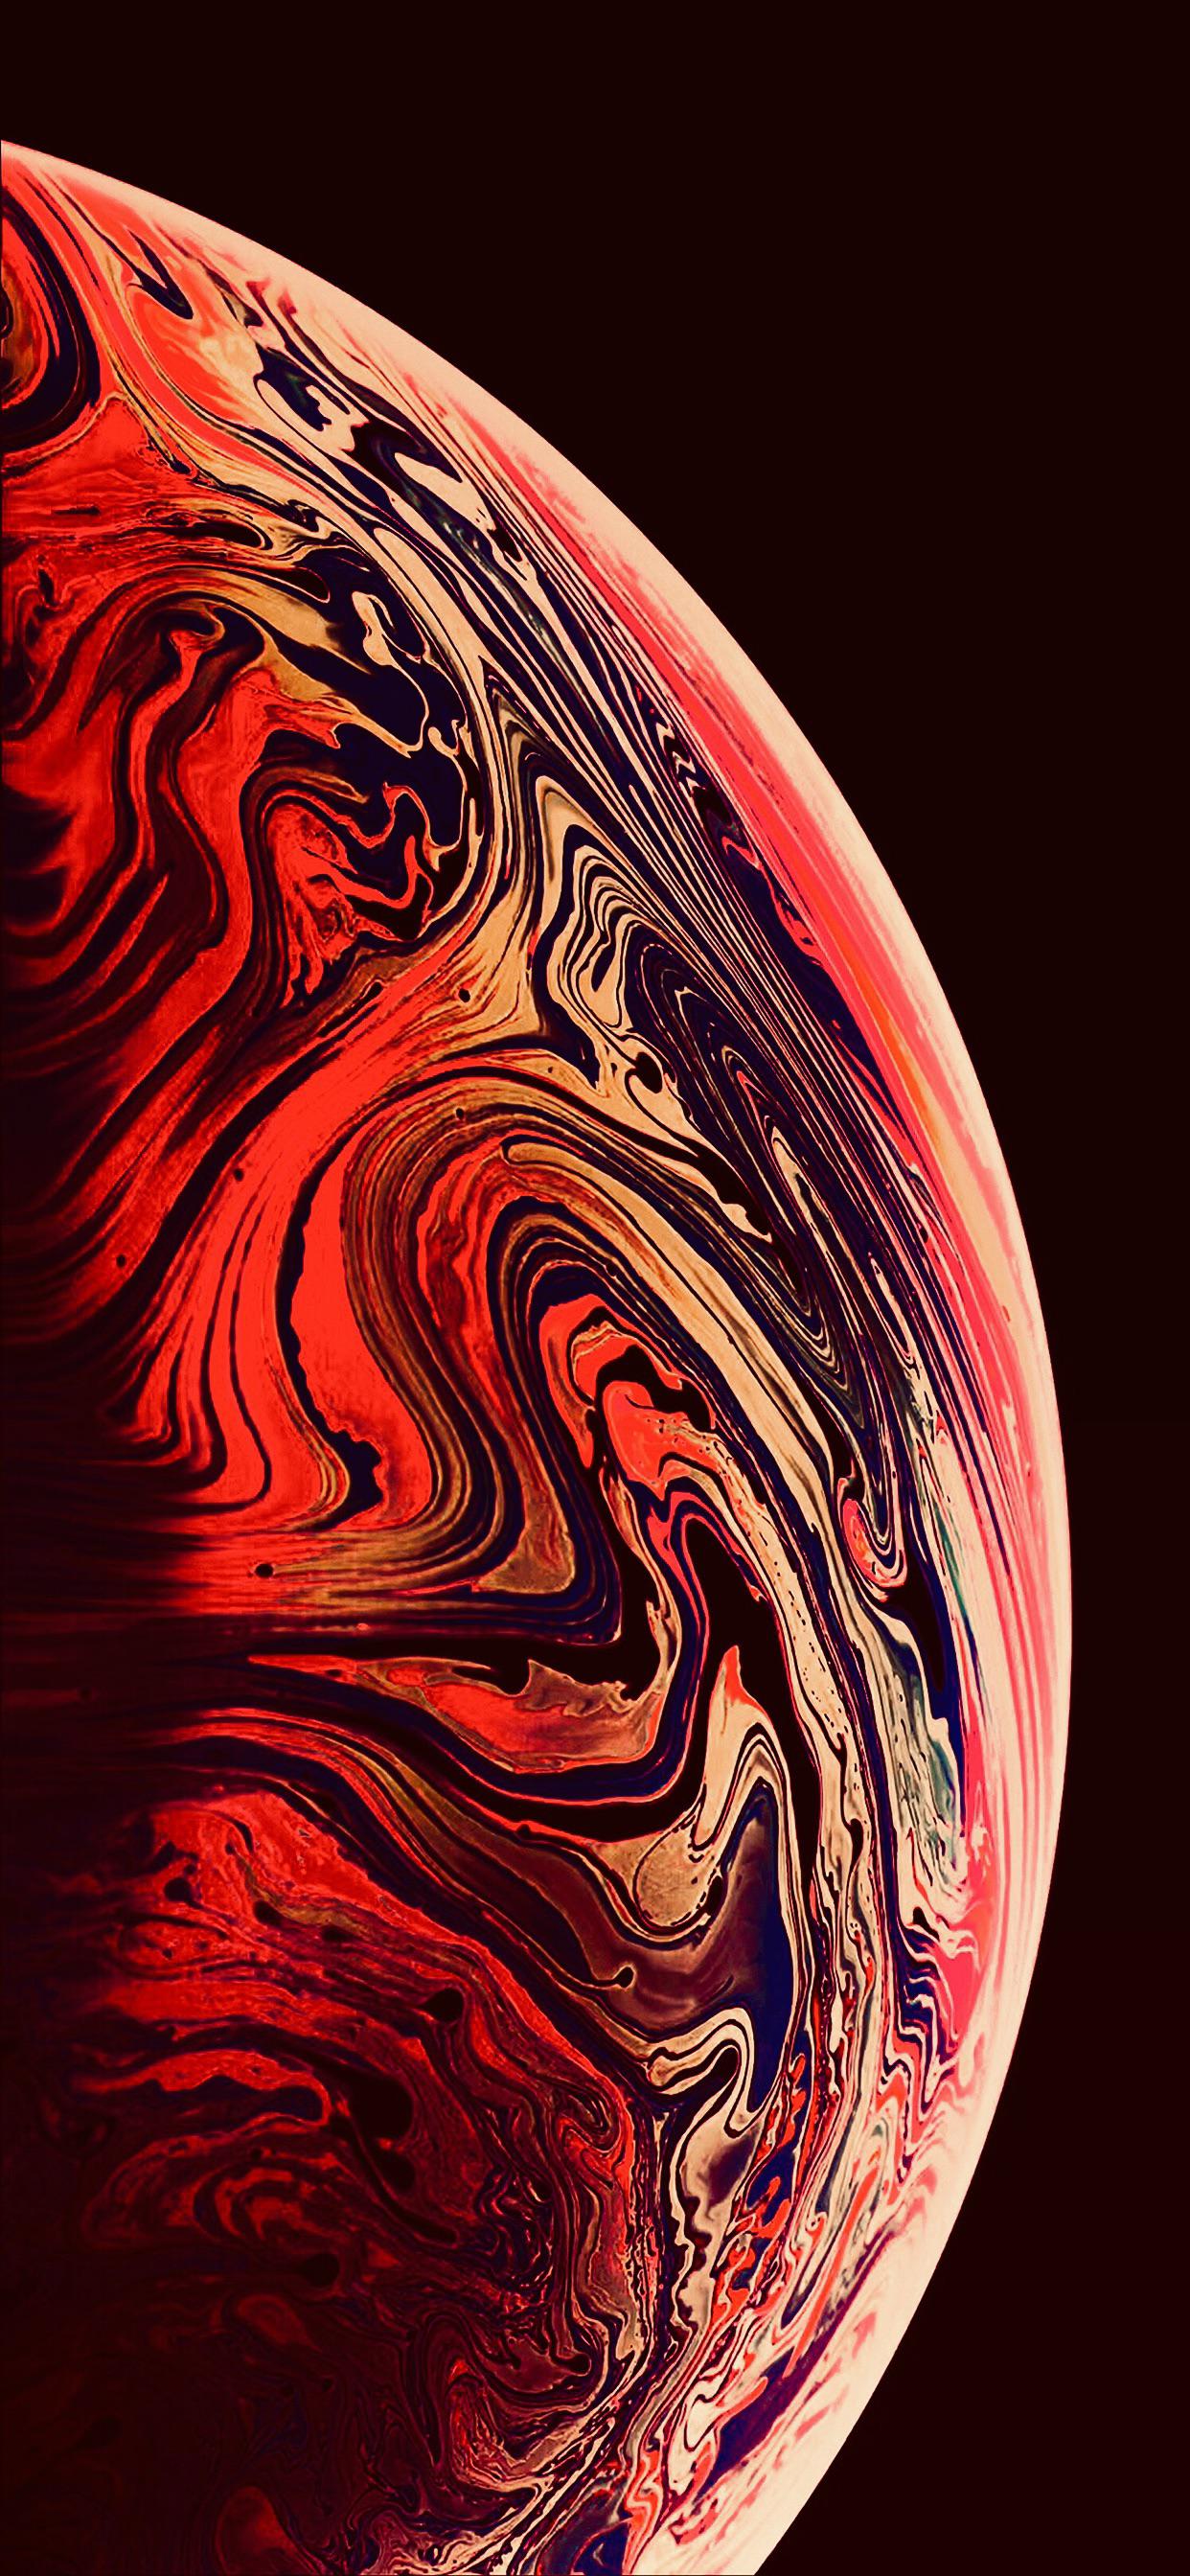 Don't know about you guys, but I enjoy the bubble wallpaper. Found this one, and did a little bit of editing on it to make the red really pop. Using this on